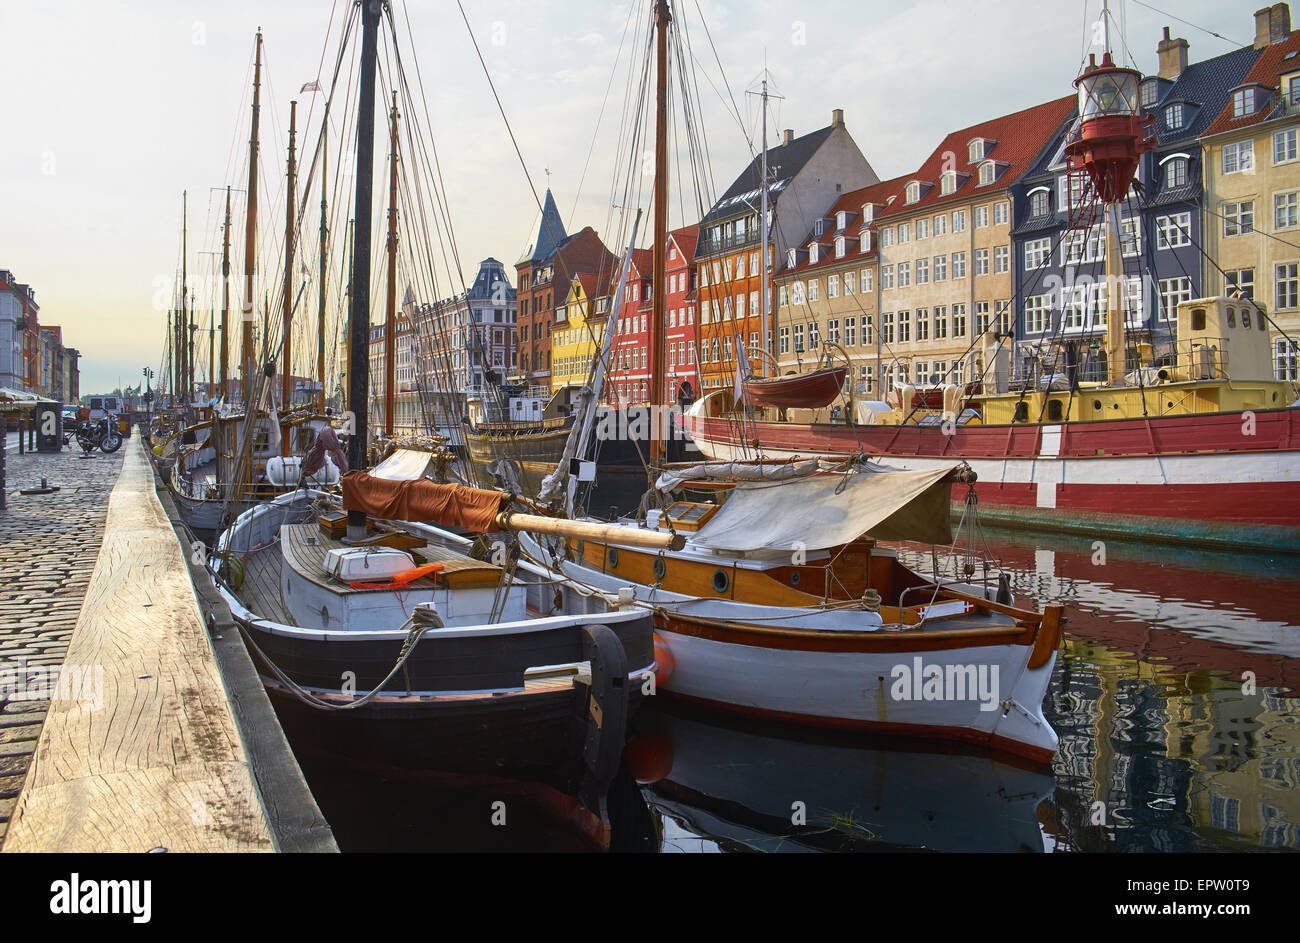 The boats and ships in the calm hurbour of Nyhavn, Copenhagen, Denmark. Nyhavn  (New Harbour) is waterfront, canal and entertain Stock Photo